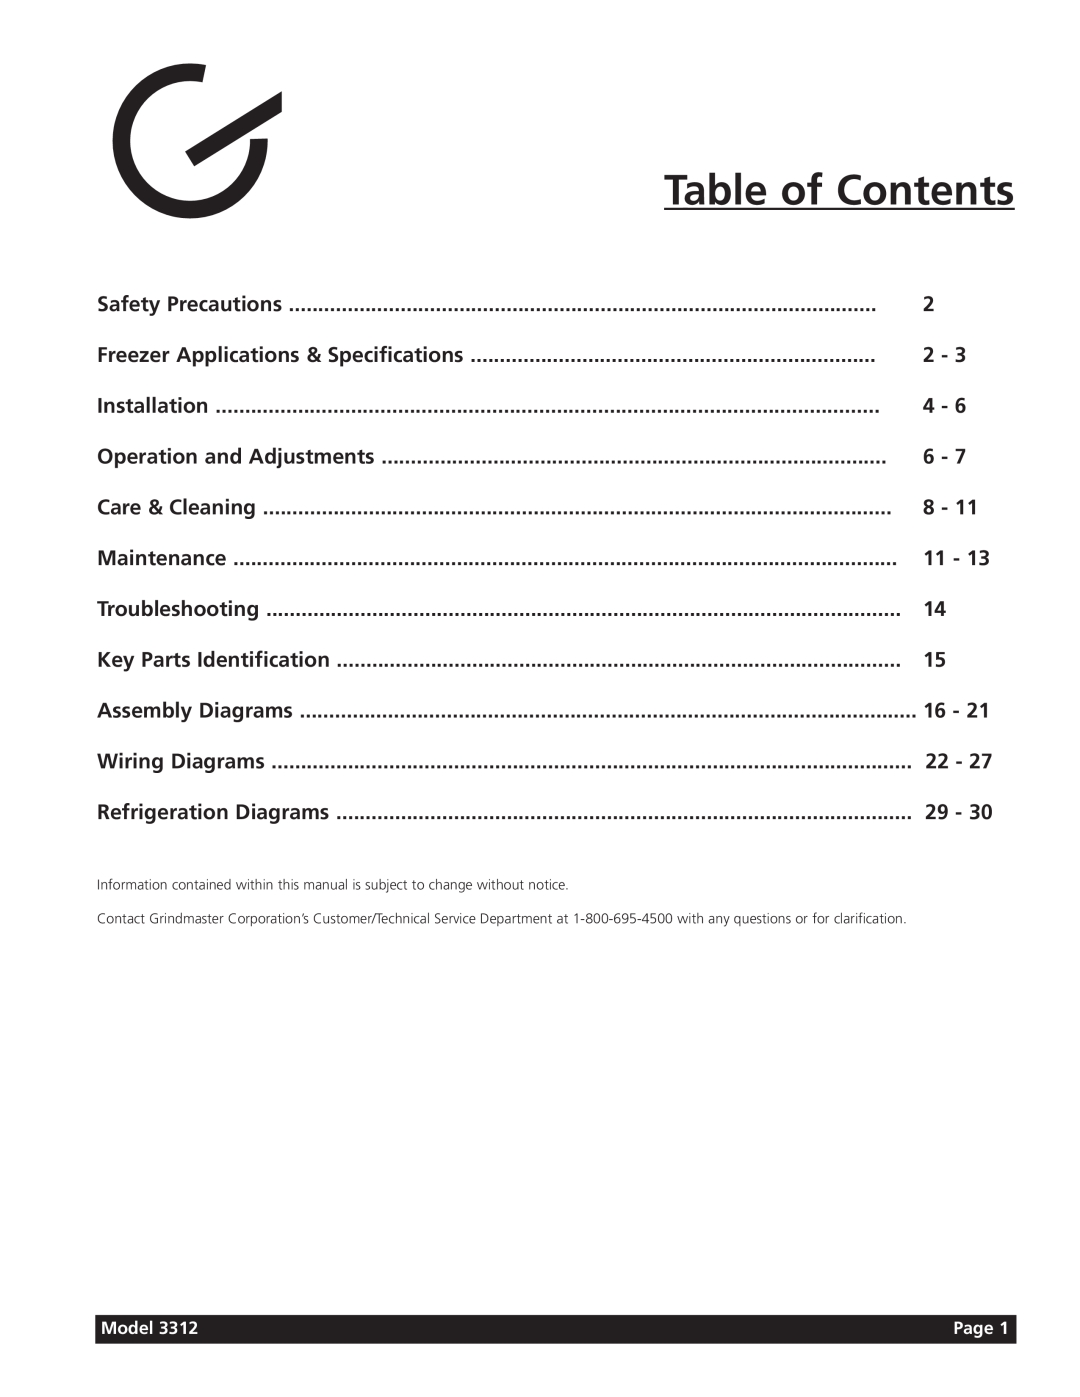 Grindmaster 3311 manual Table of Contents 